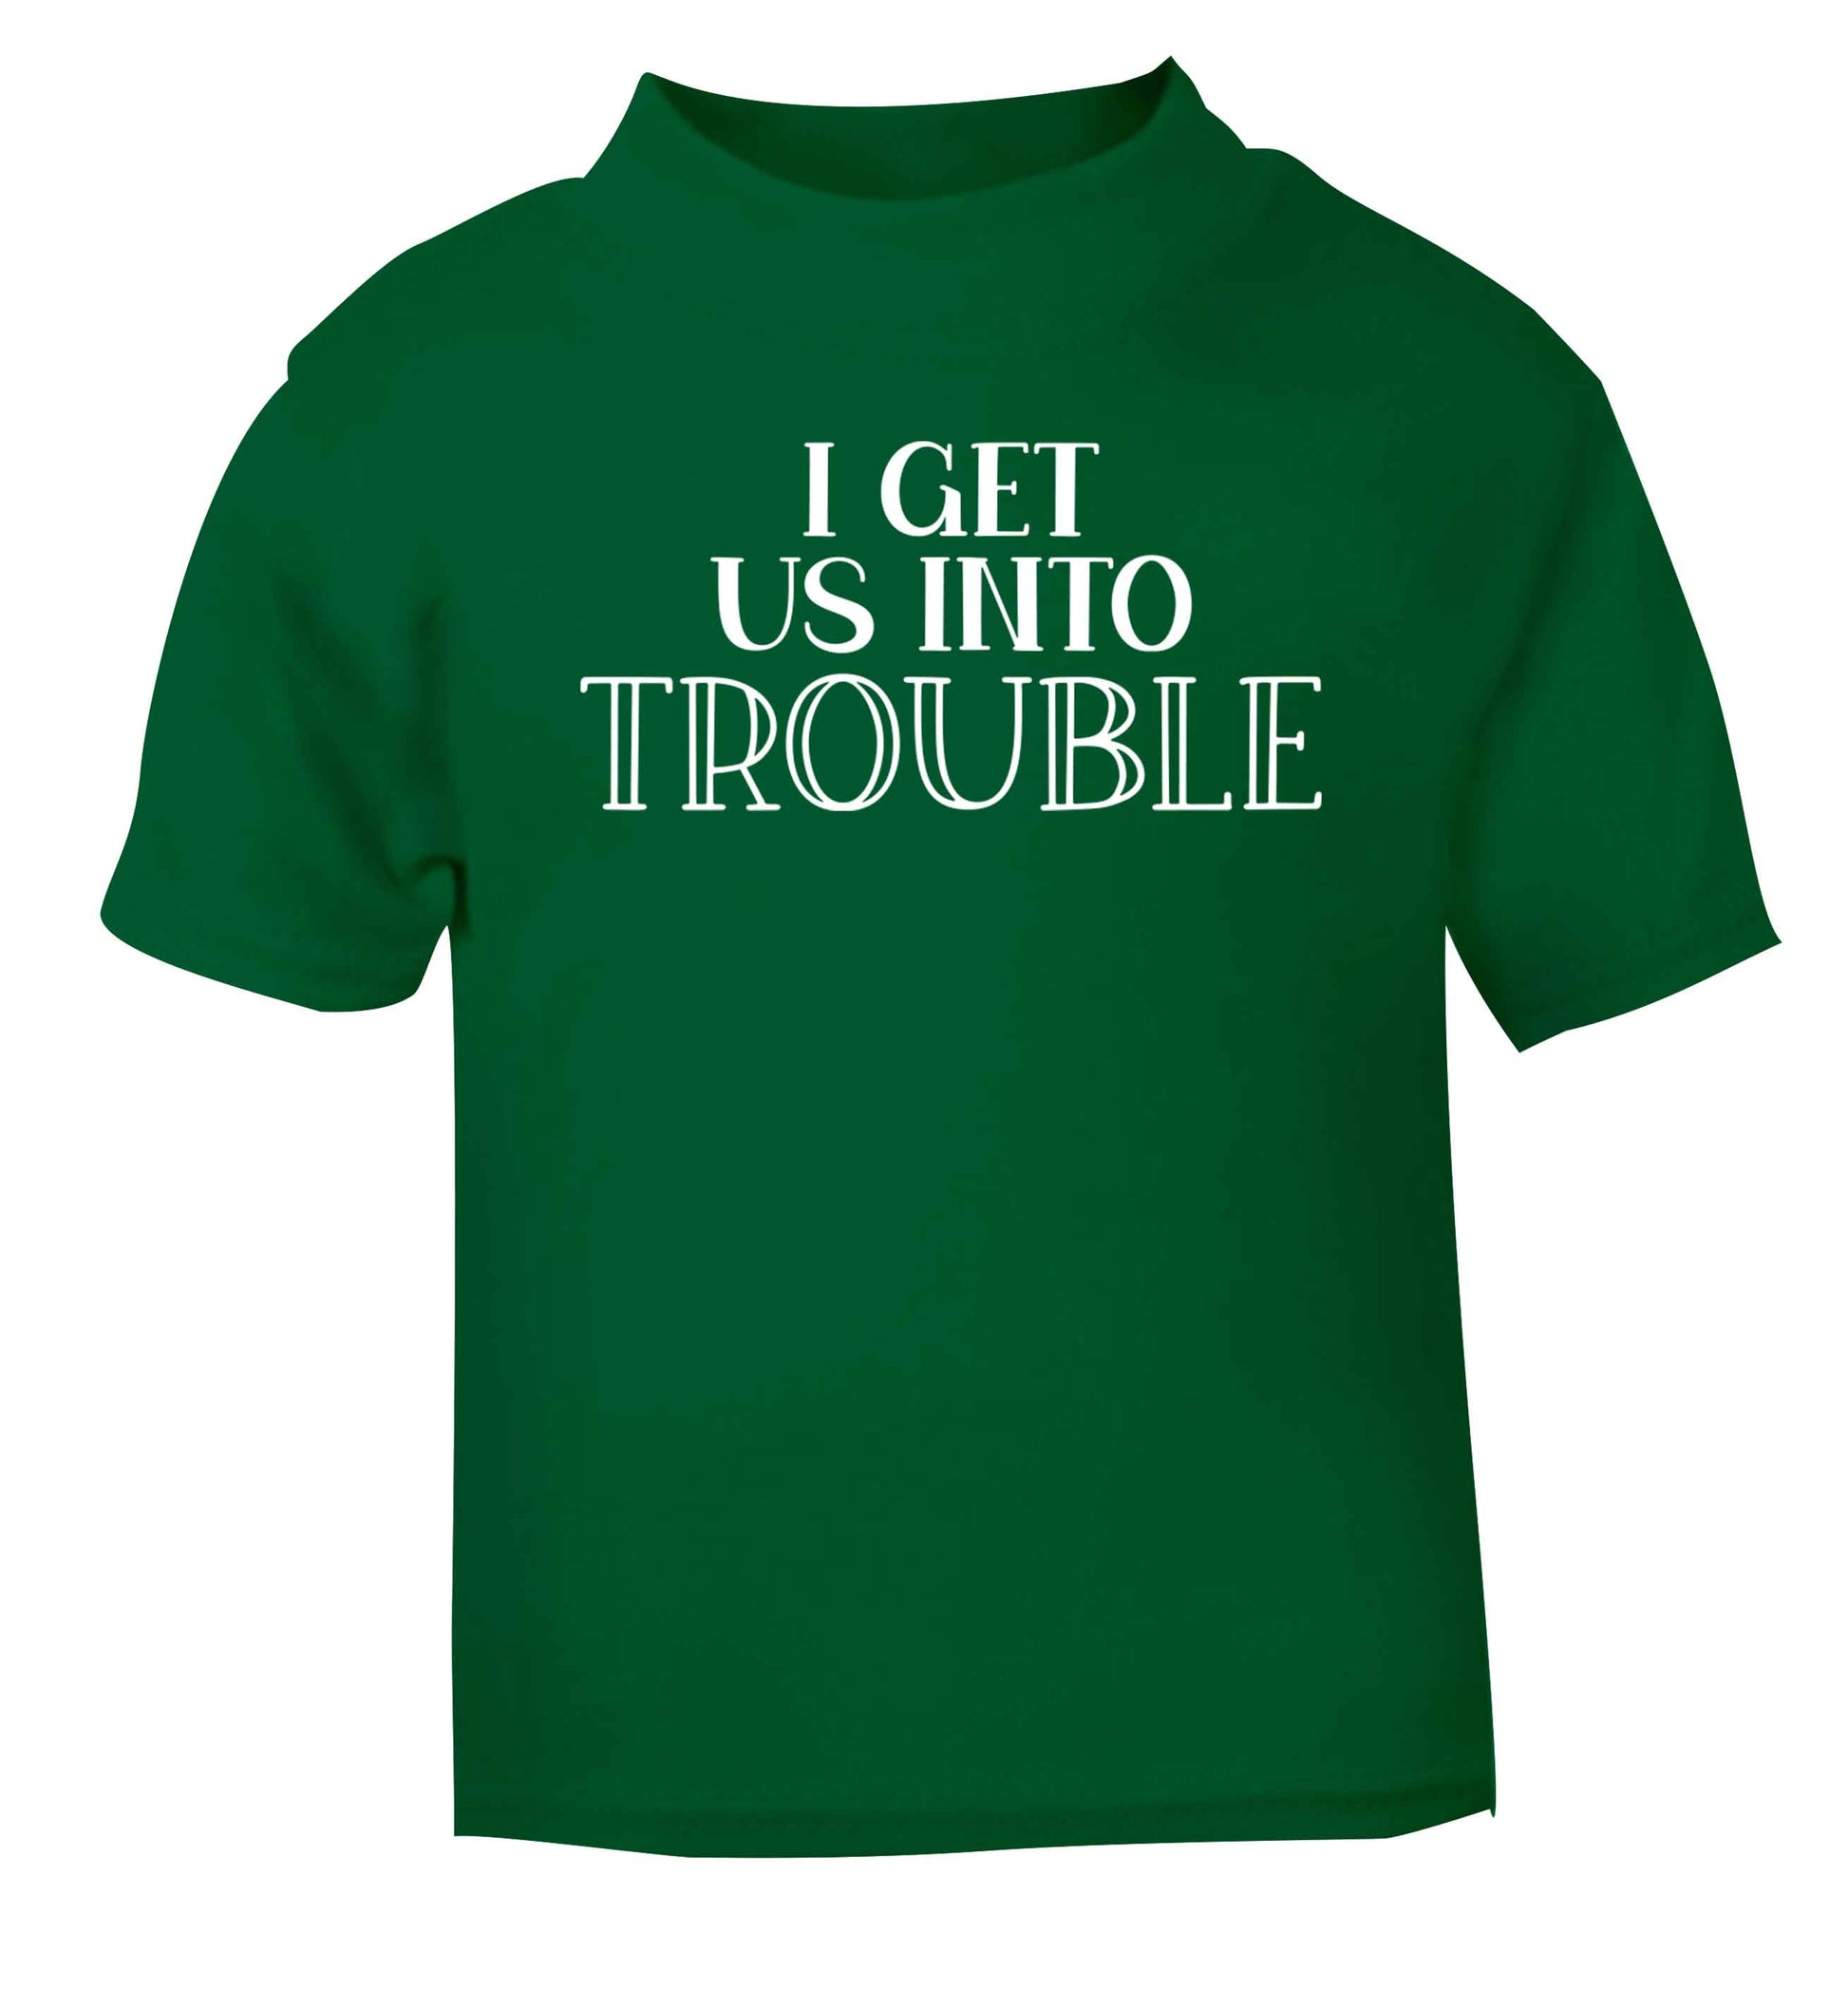 I get us into trouble green baby toddler Tshirt 2 Years